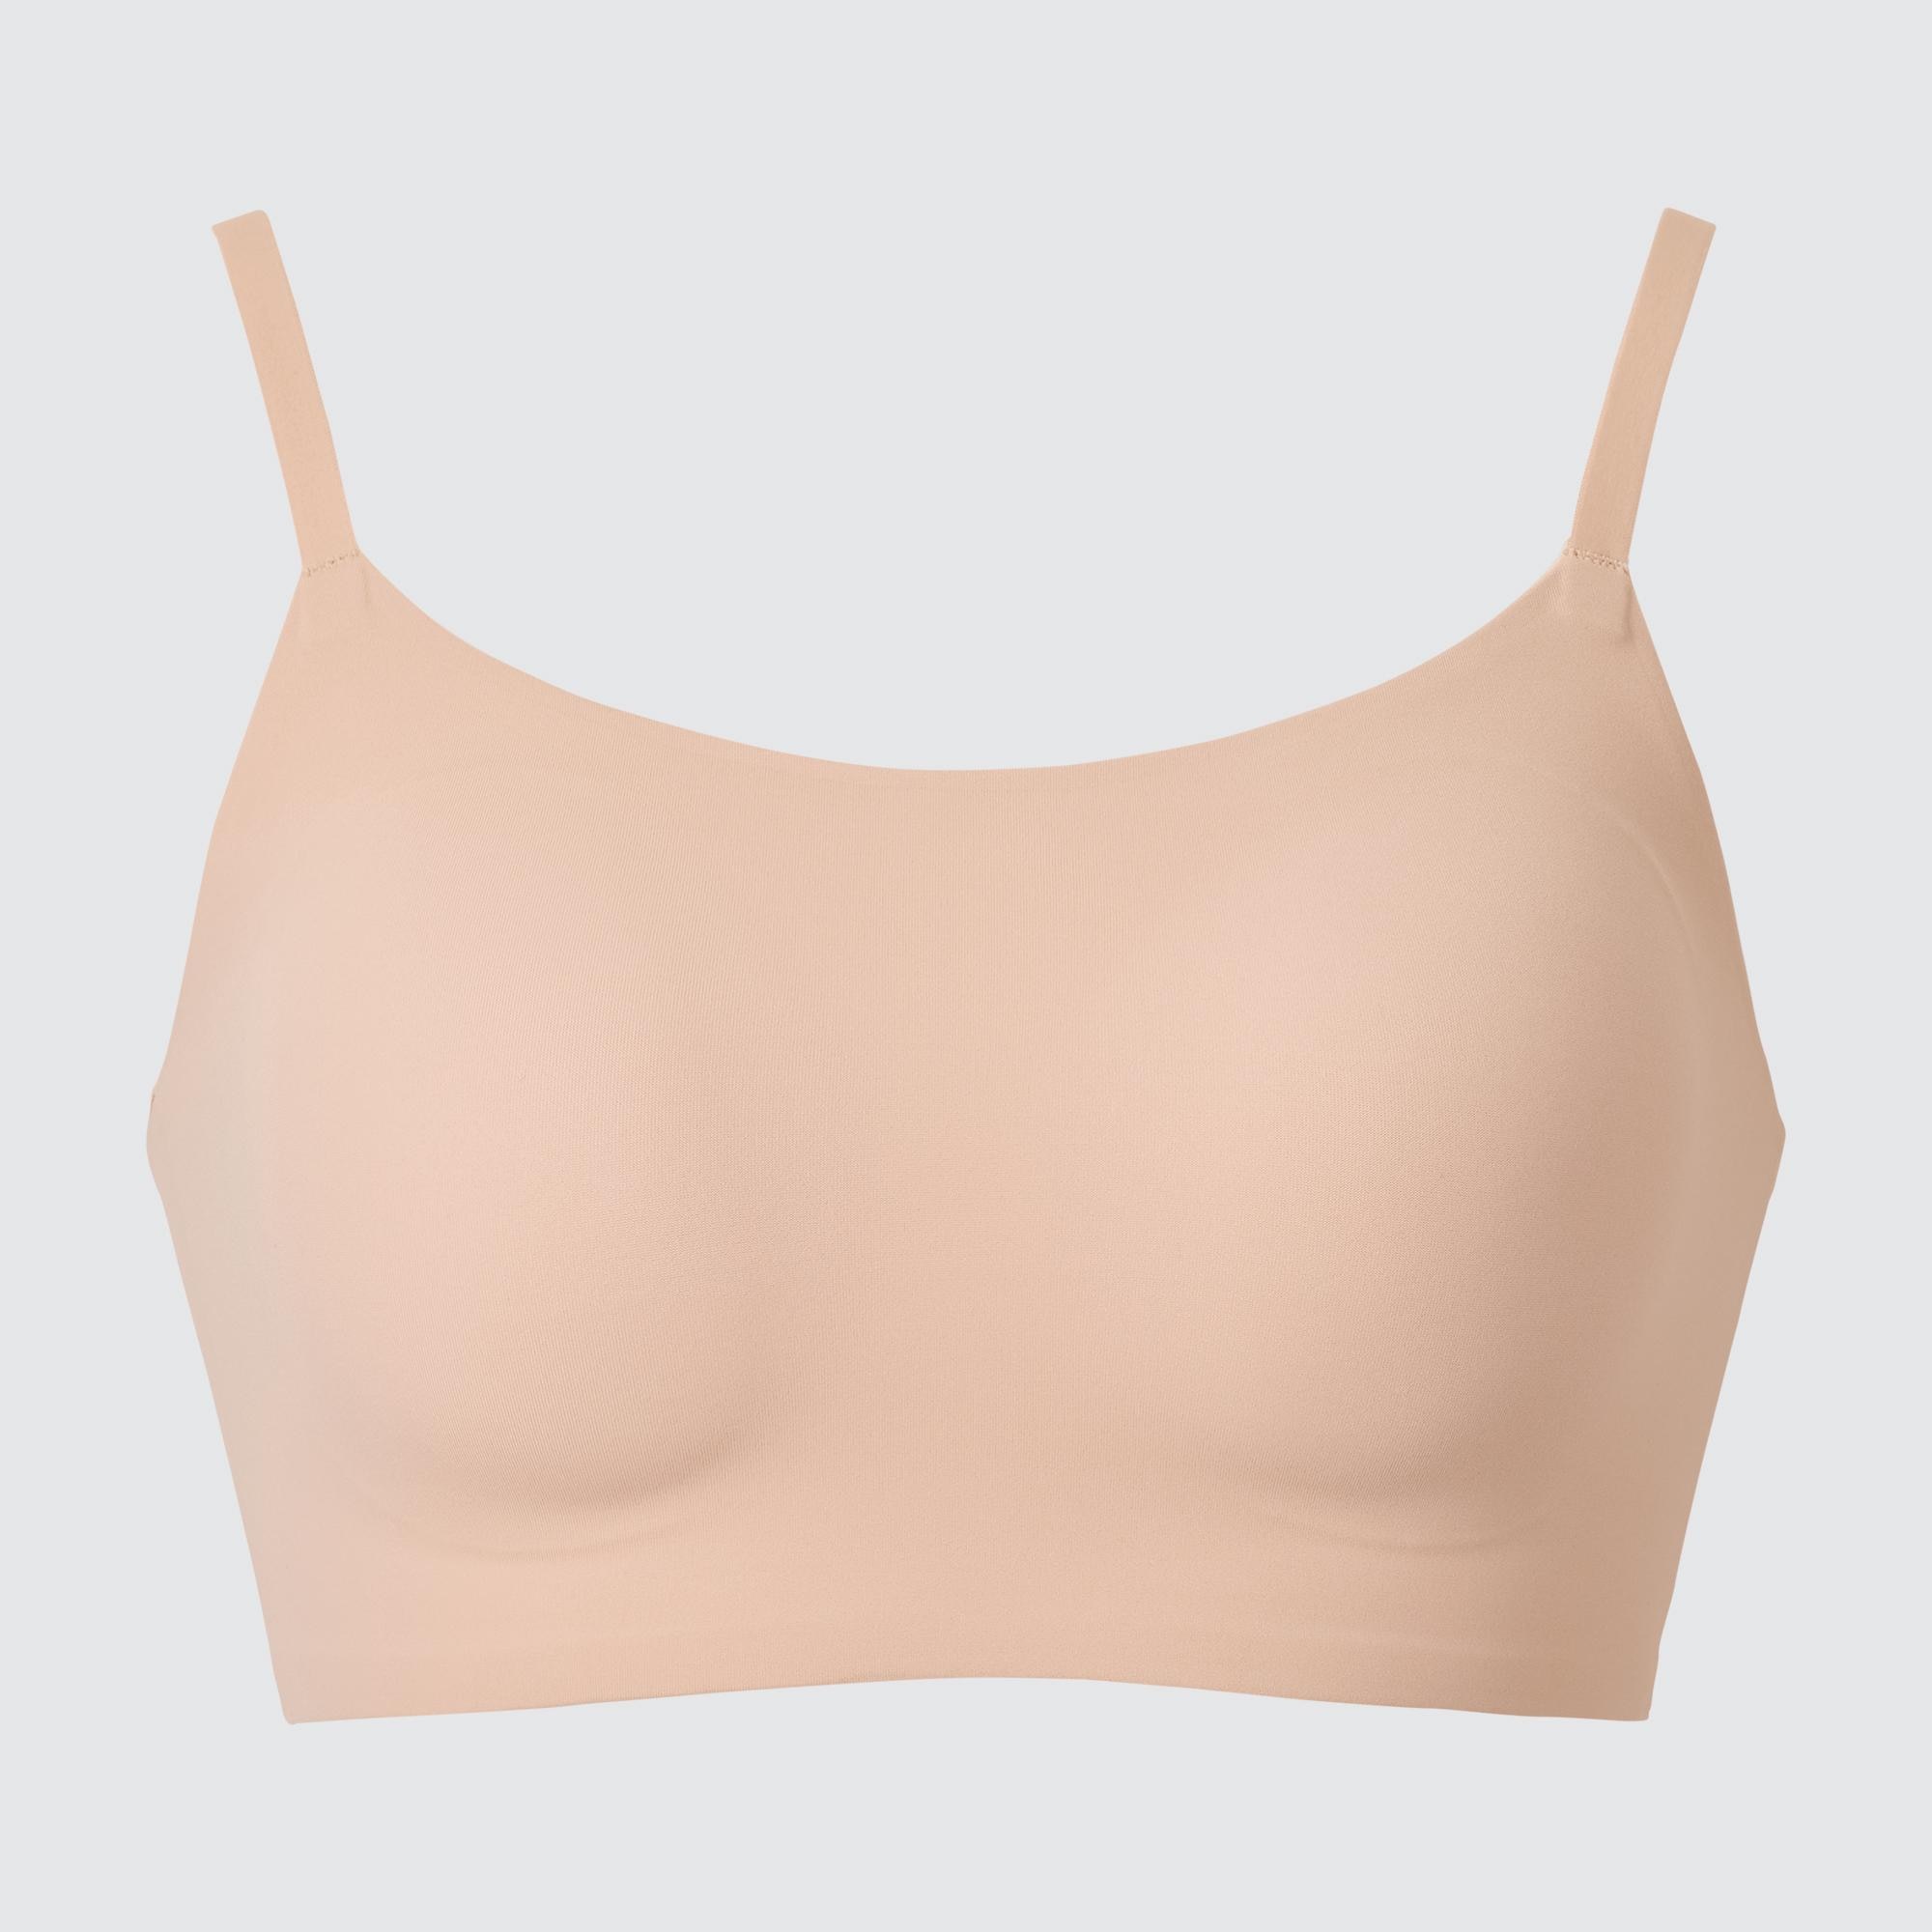 Uniqlo Australia - Have you discovered our Wireless Bras? Now just $19.90  for a limited time only. Our Wireless Bra provides a great fit that  flatters the bust and is available in